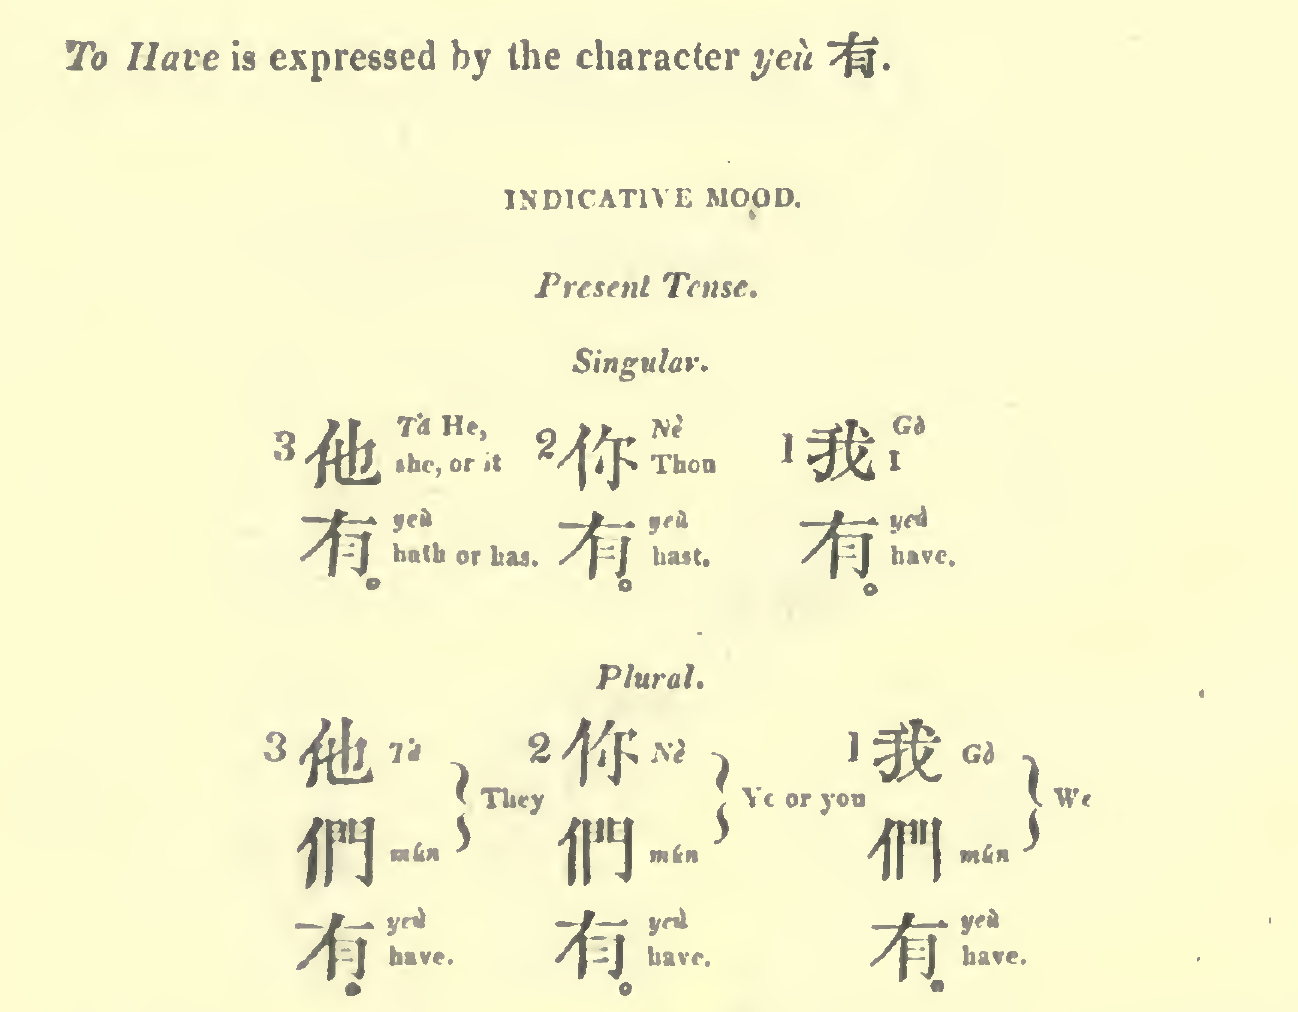 Indo-European-style verb conjugation for Chinese verbs in Morrison's textbook